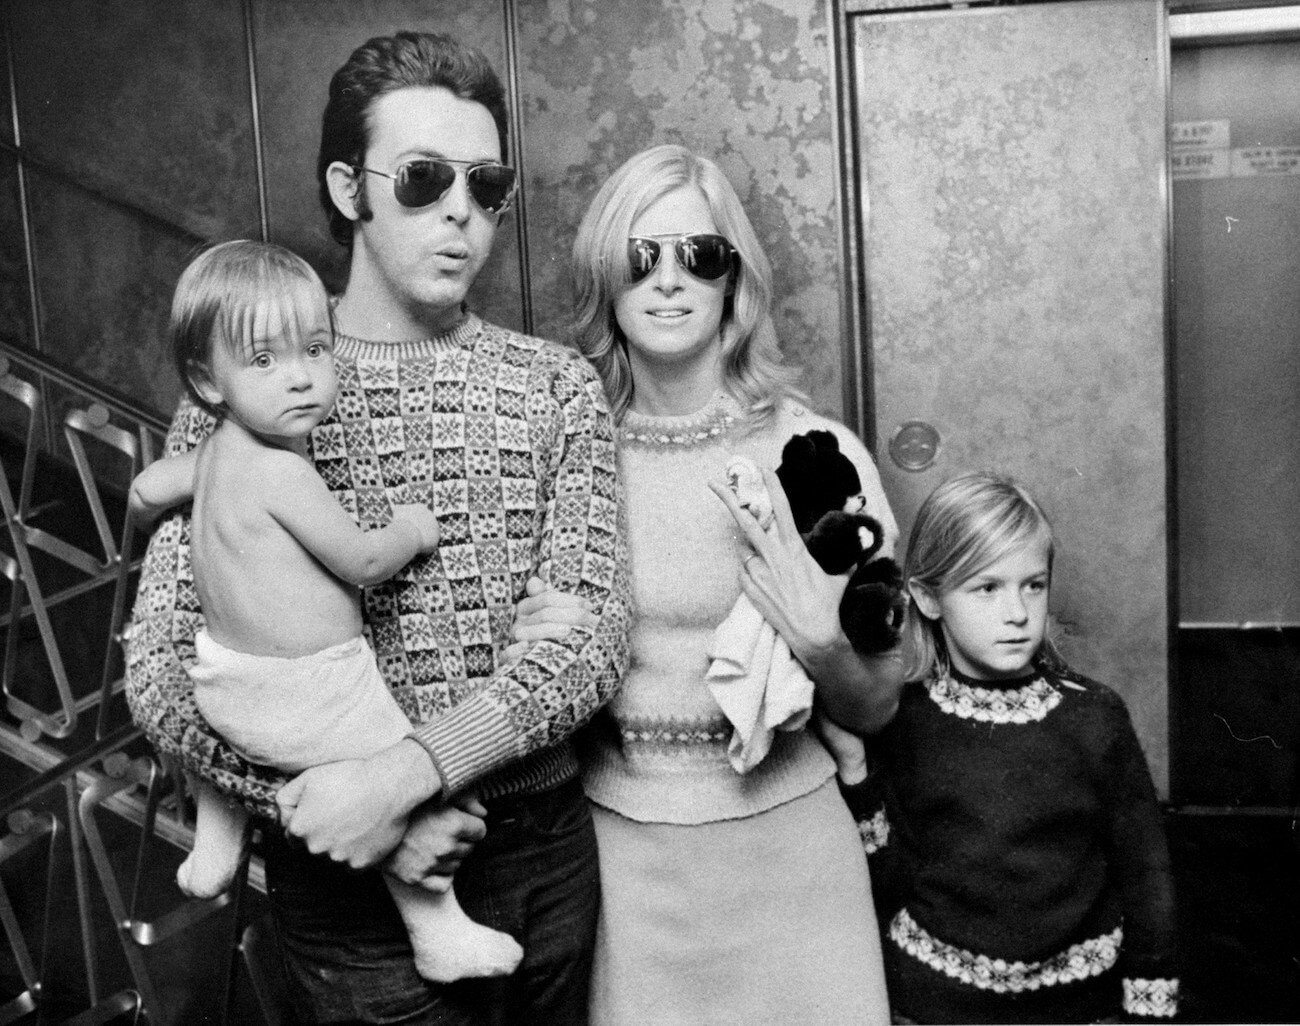 Paul McCartney with his wife Linda and kids in 1970.